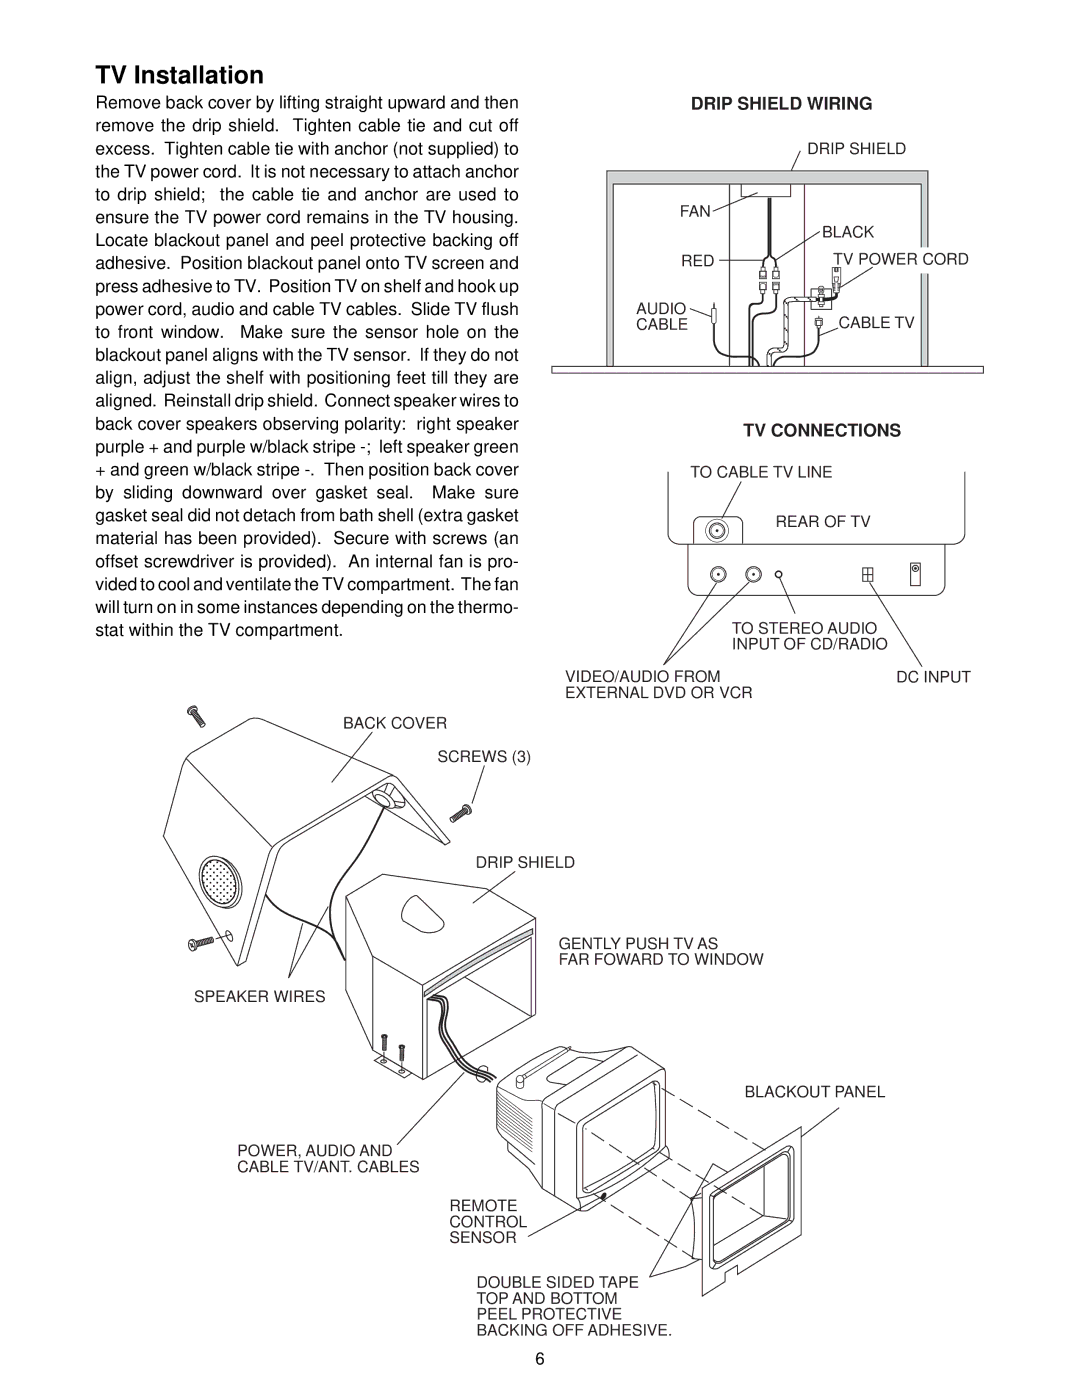 Jacuzzi S198 owner manual TV Installation, Drip Shield Wiring 